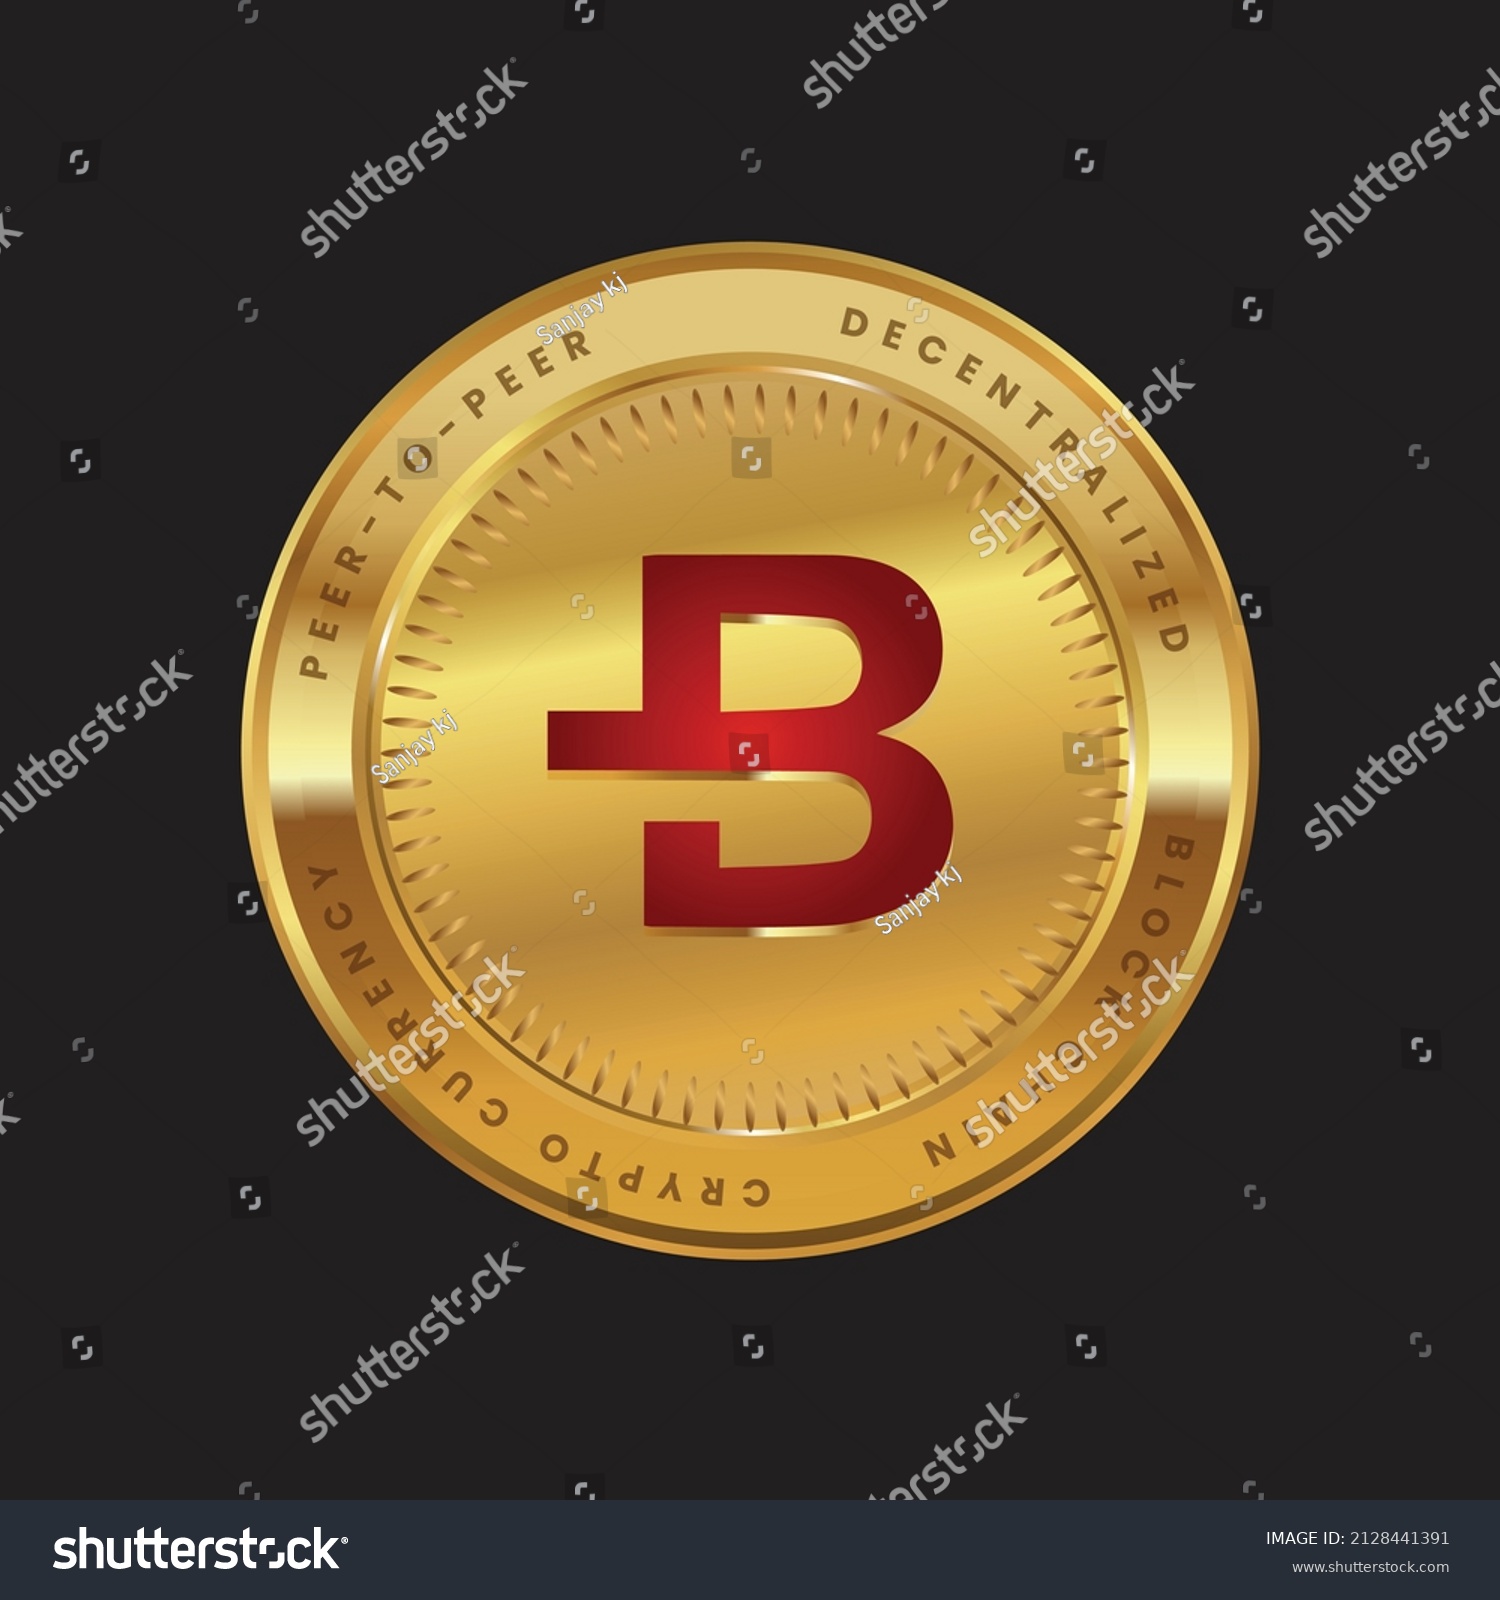 SVG of Bytecoin BCN cryptocurrency token logo on gold coin in red color theme. svg